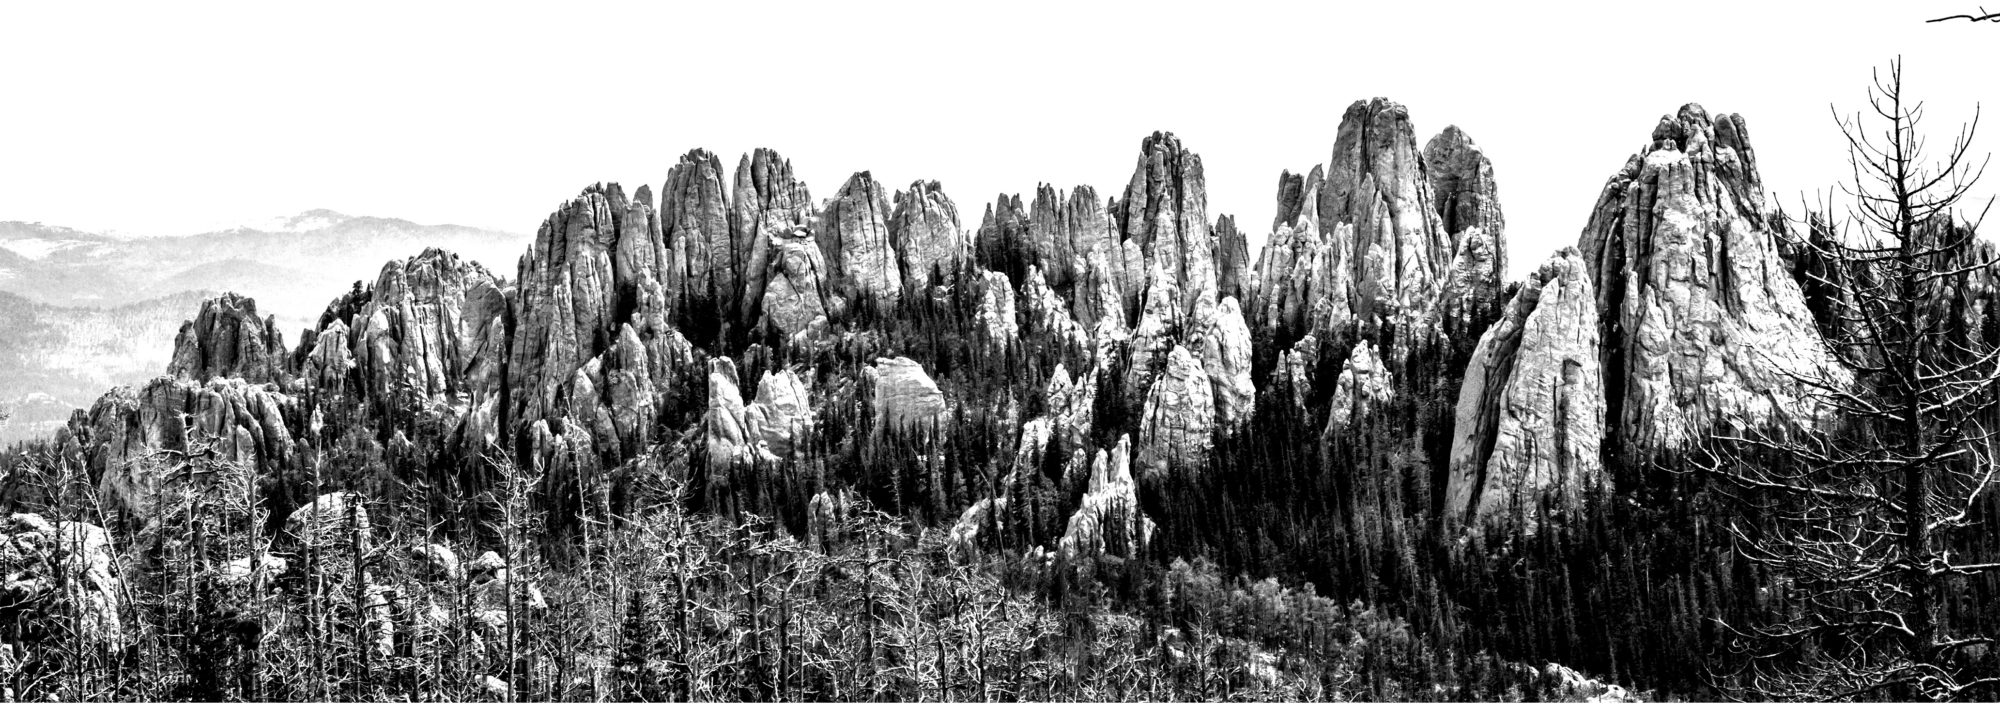 Stock Photo View Form Harney Peak At The Rock Formations In Custer State Park Cathedral Spires And Needles 204535144